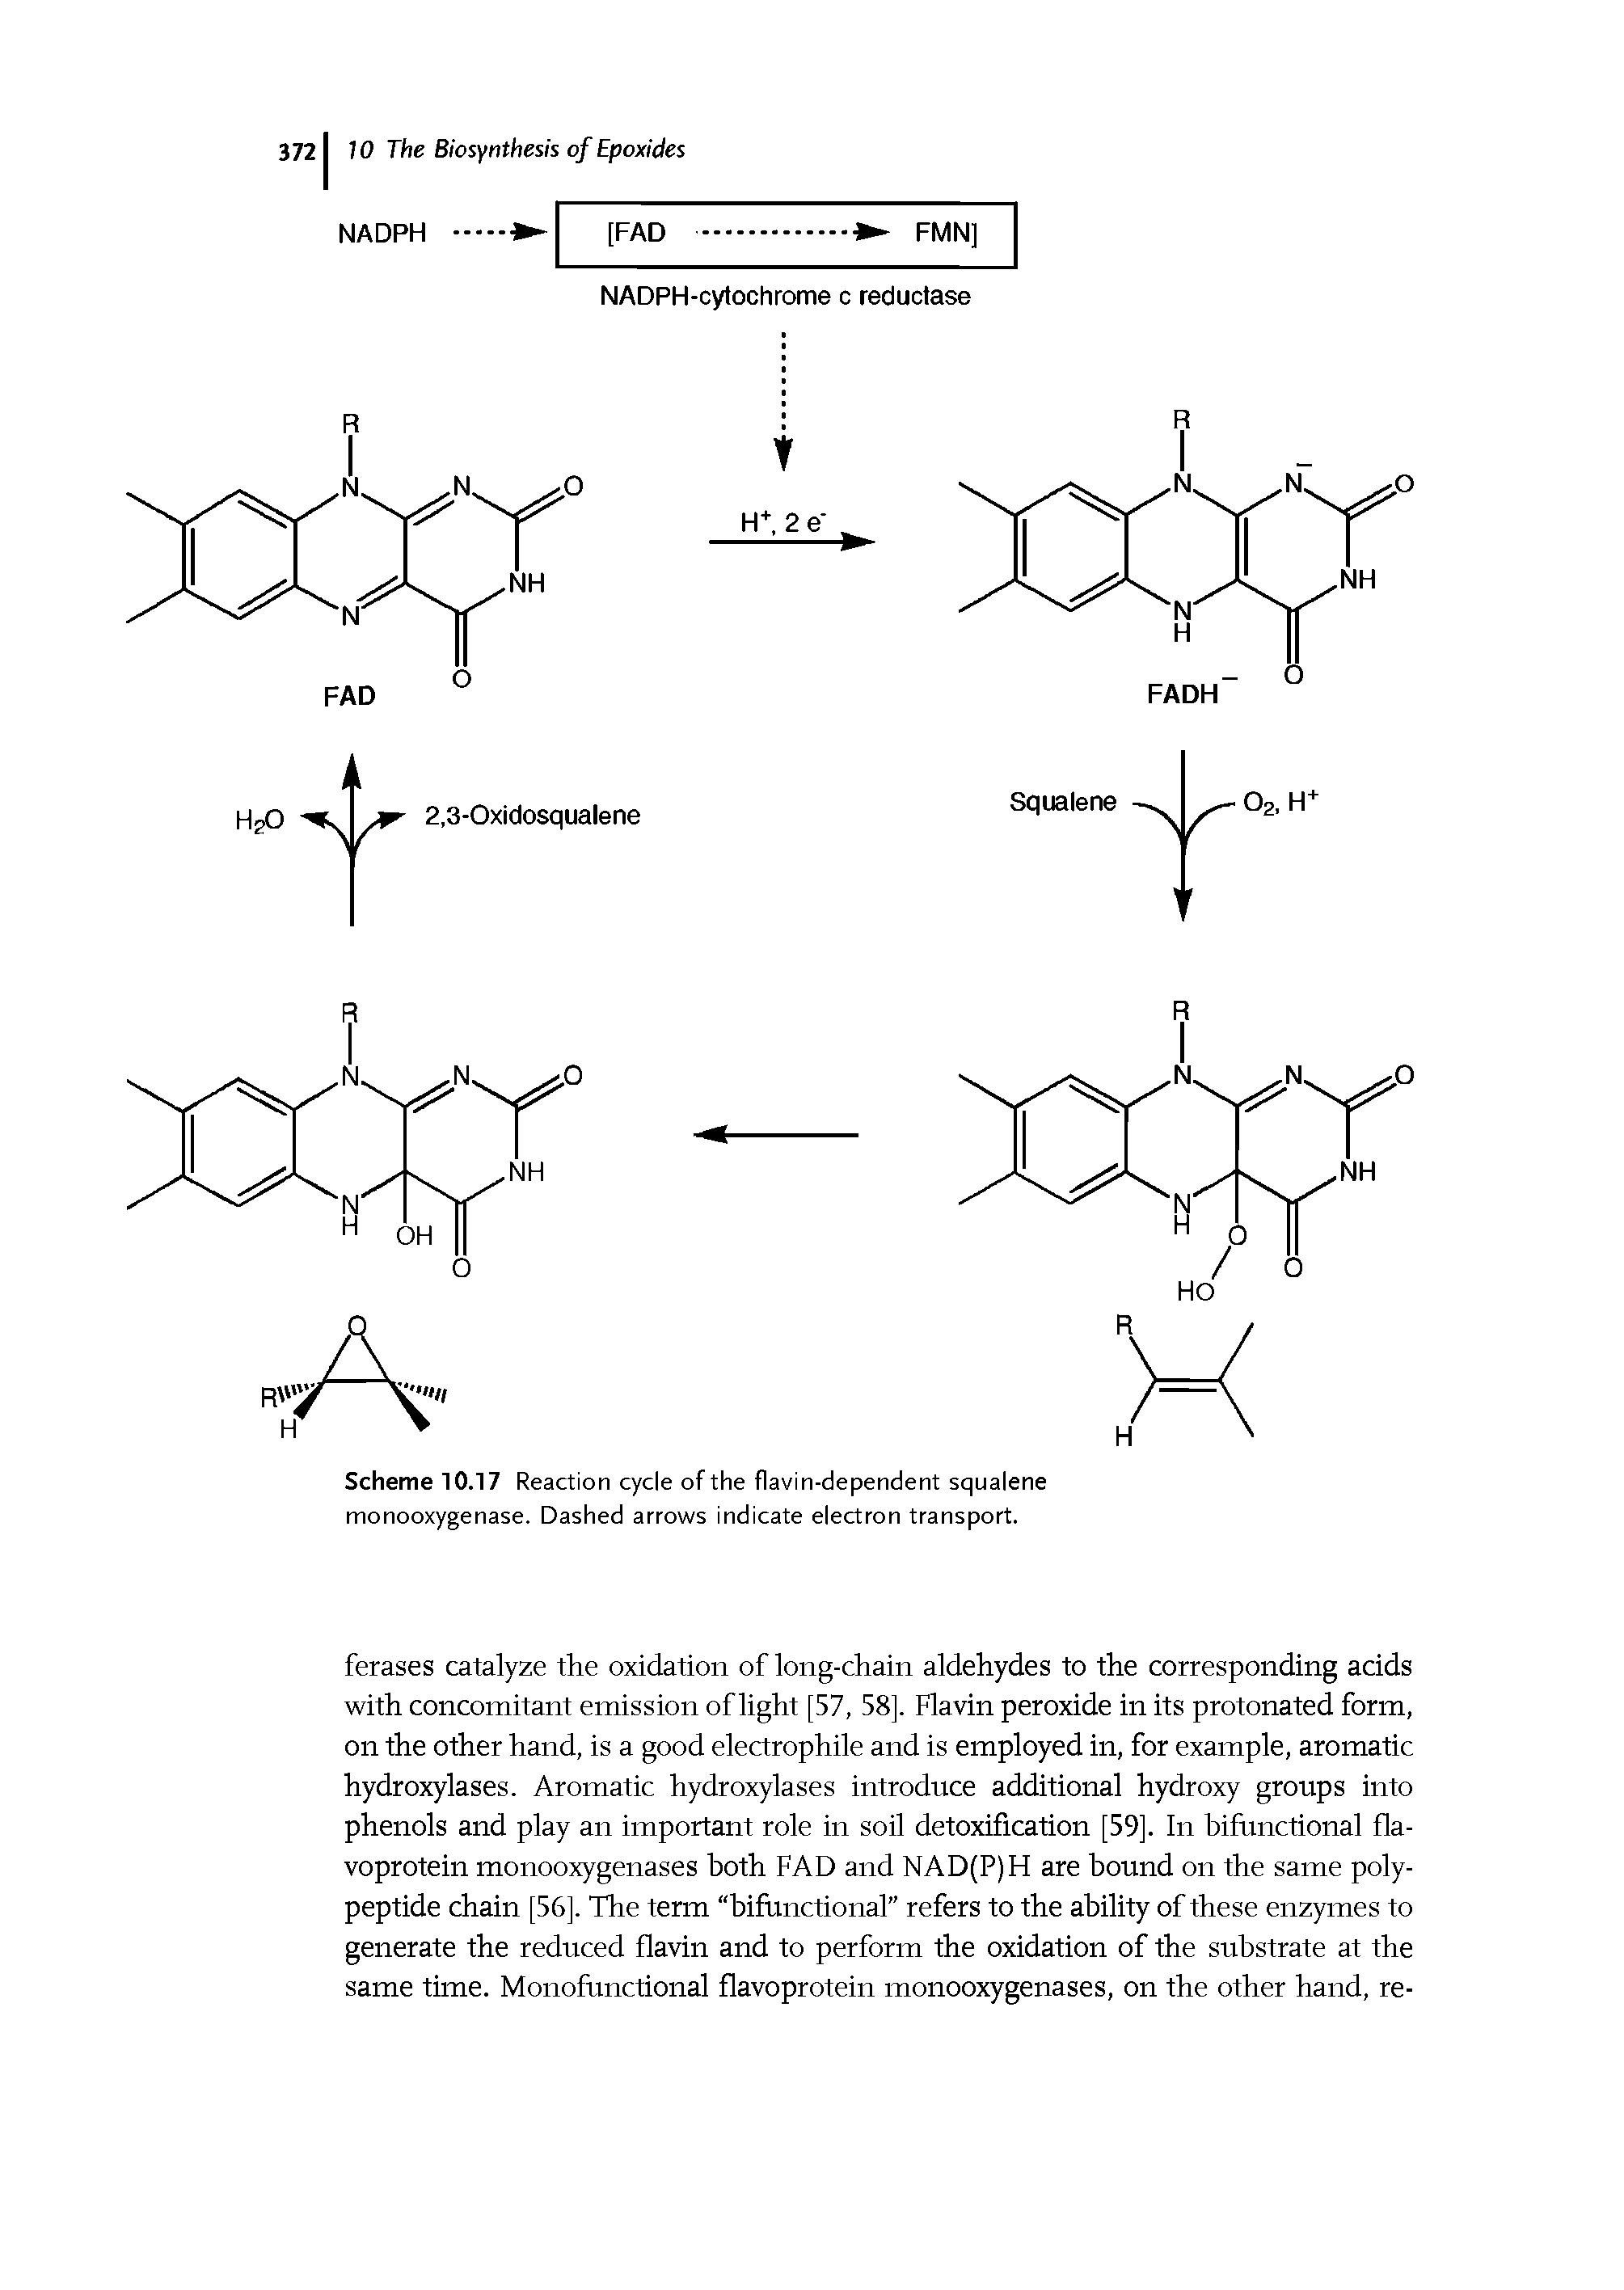 Scheme 10.17 Reaction cycle of the flavin-dependent squalene monooxygenase. Dashed arrows indicate electron transport.